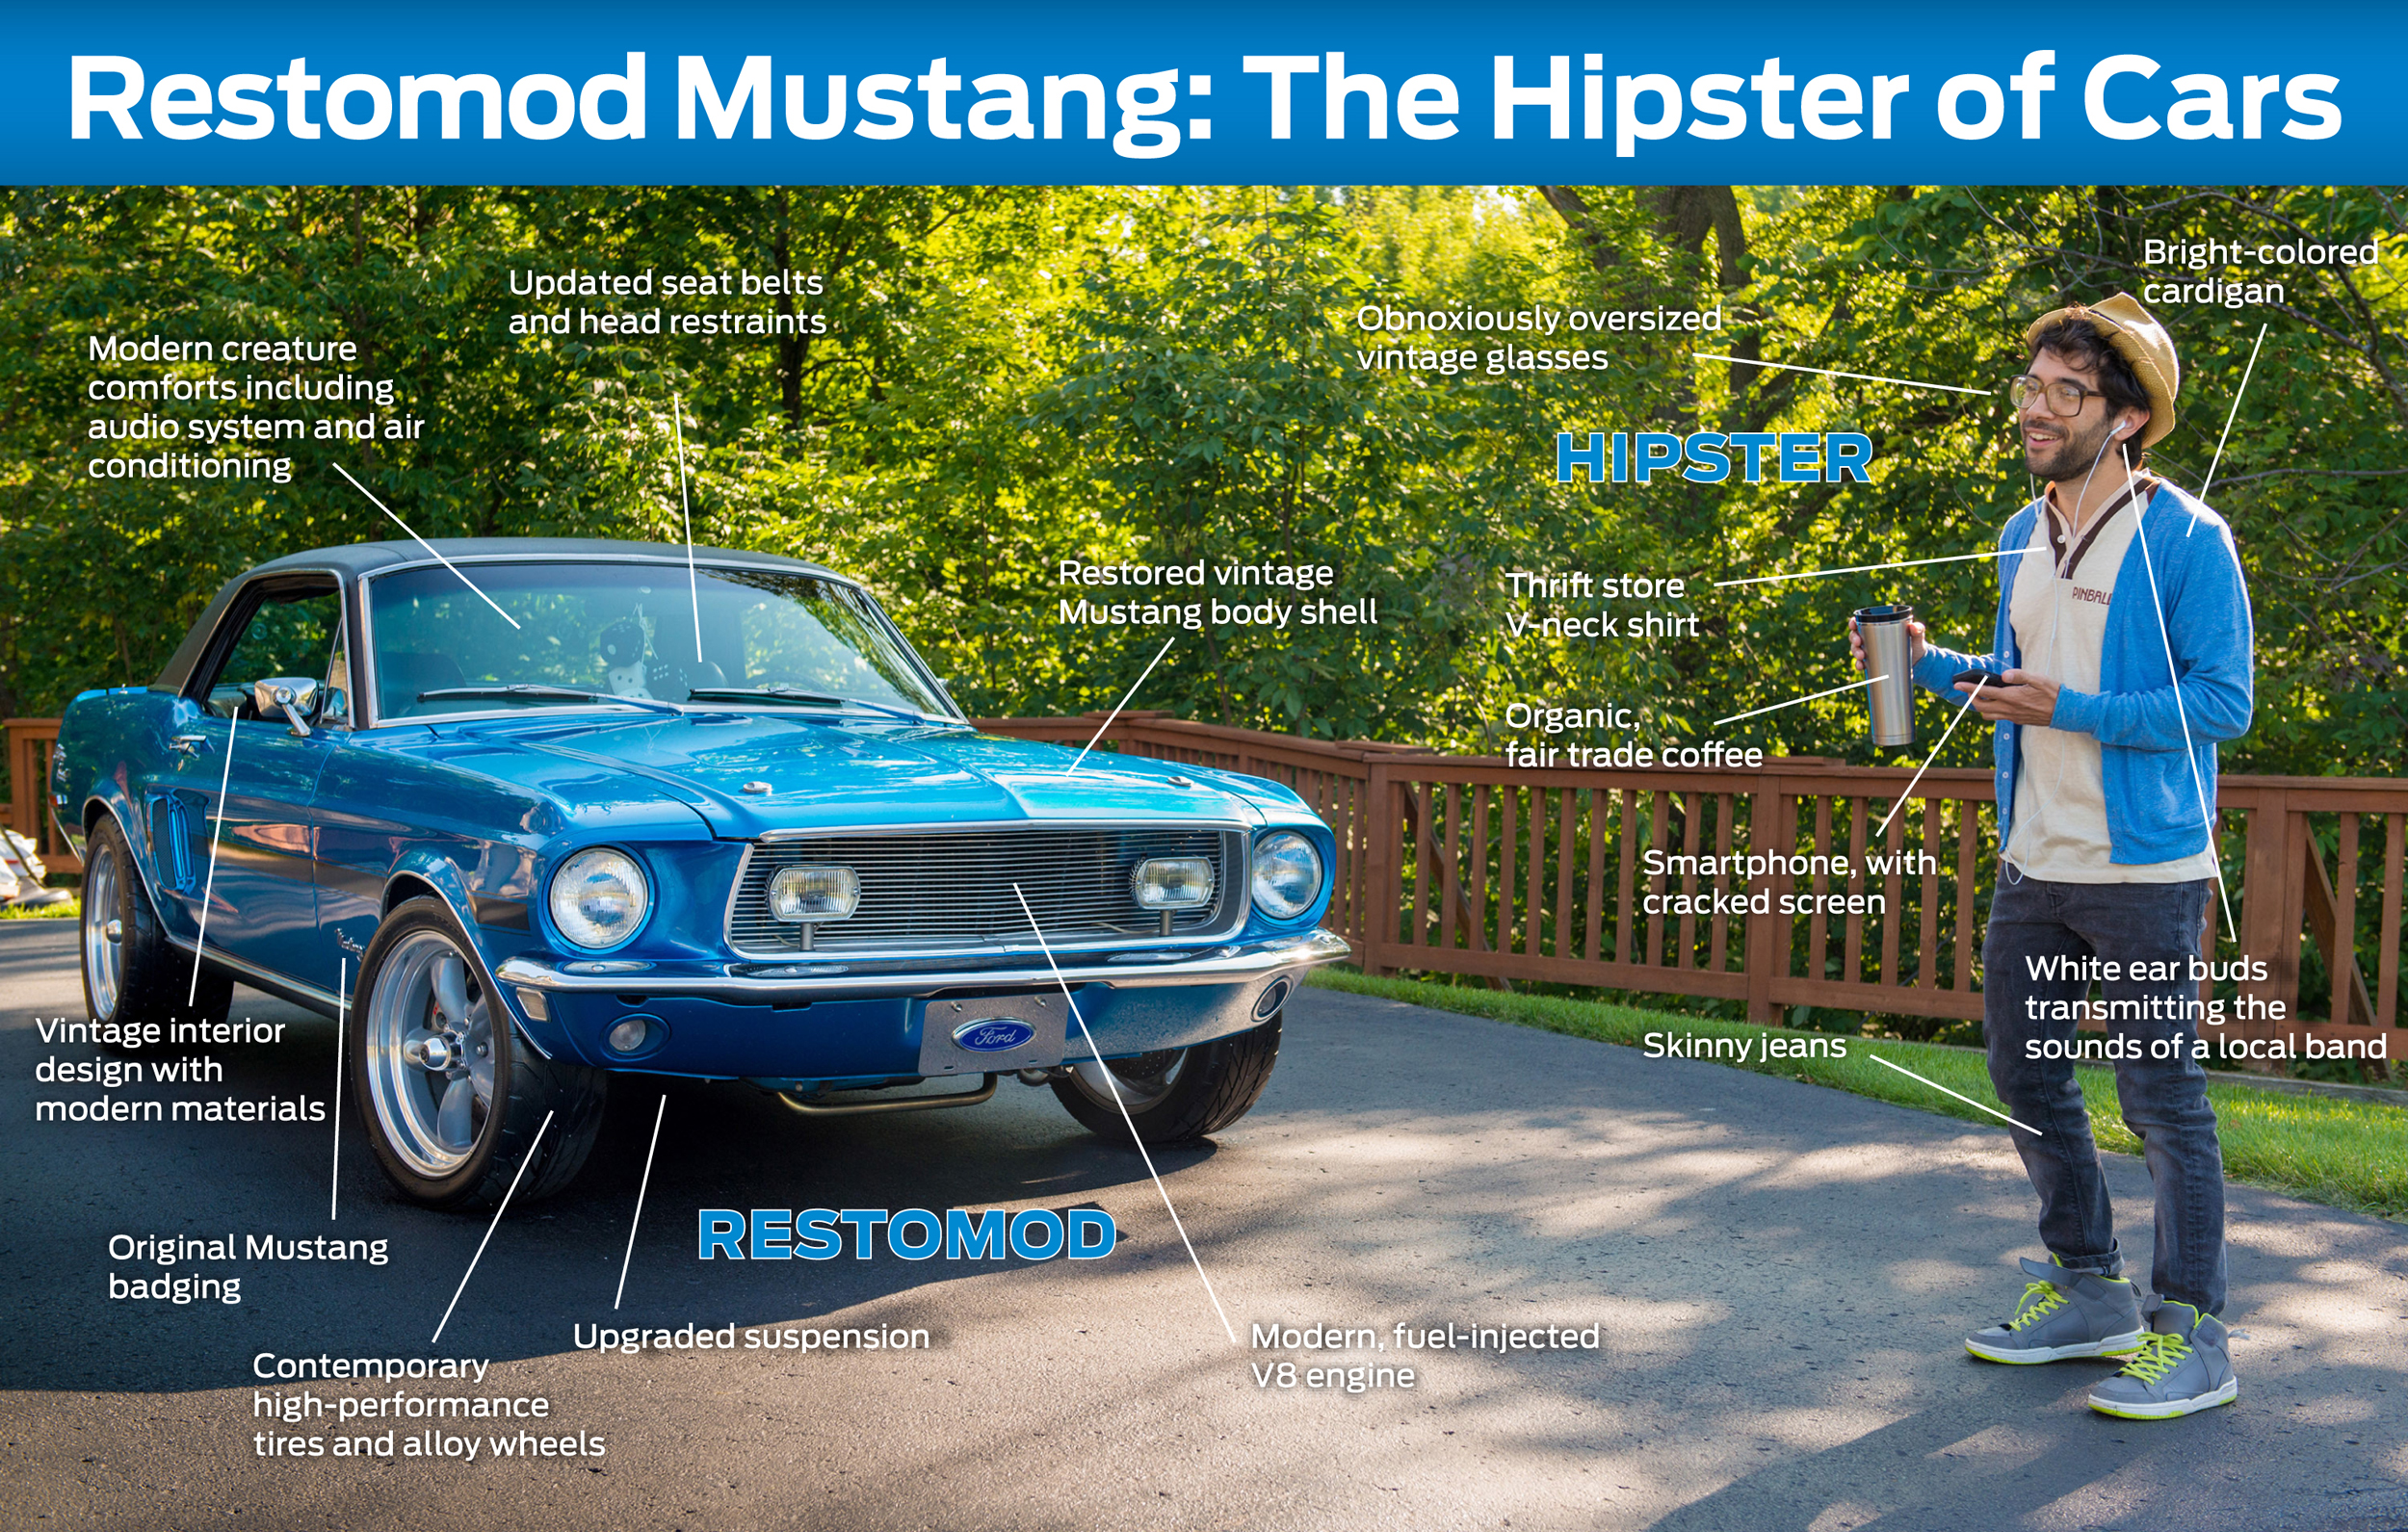 Restomod Mustang: The Hipster of Cars